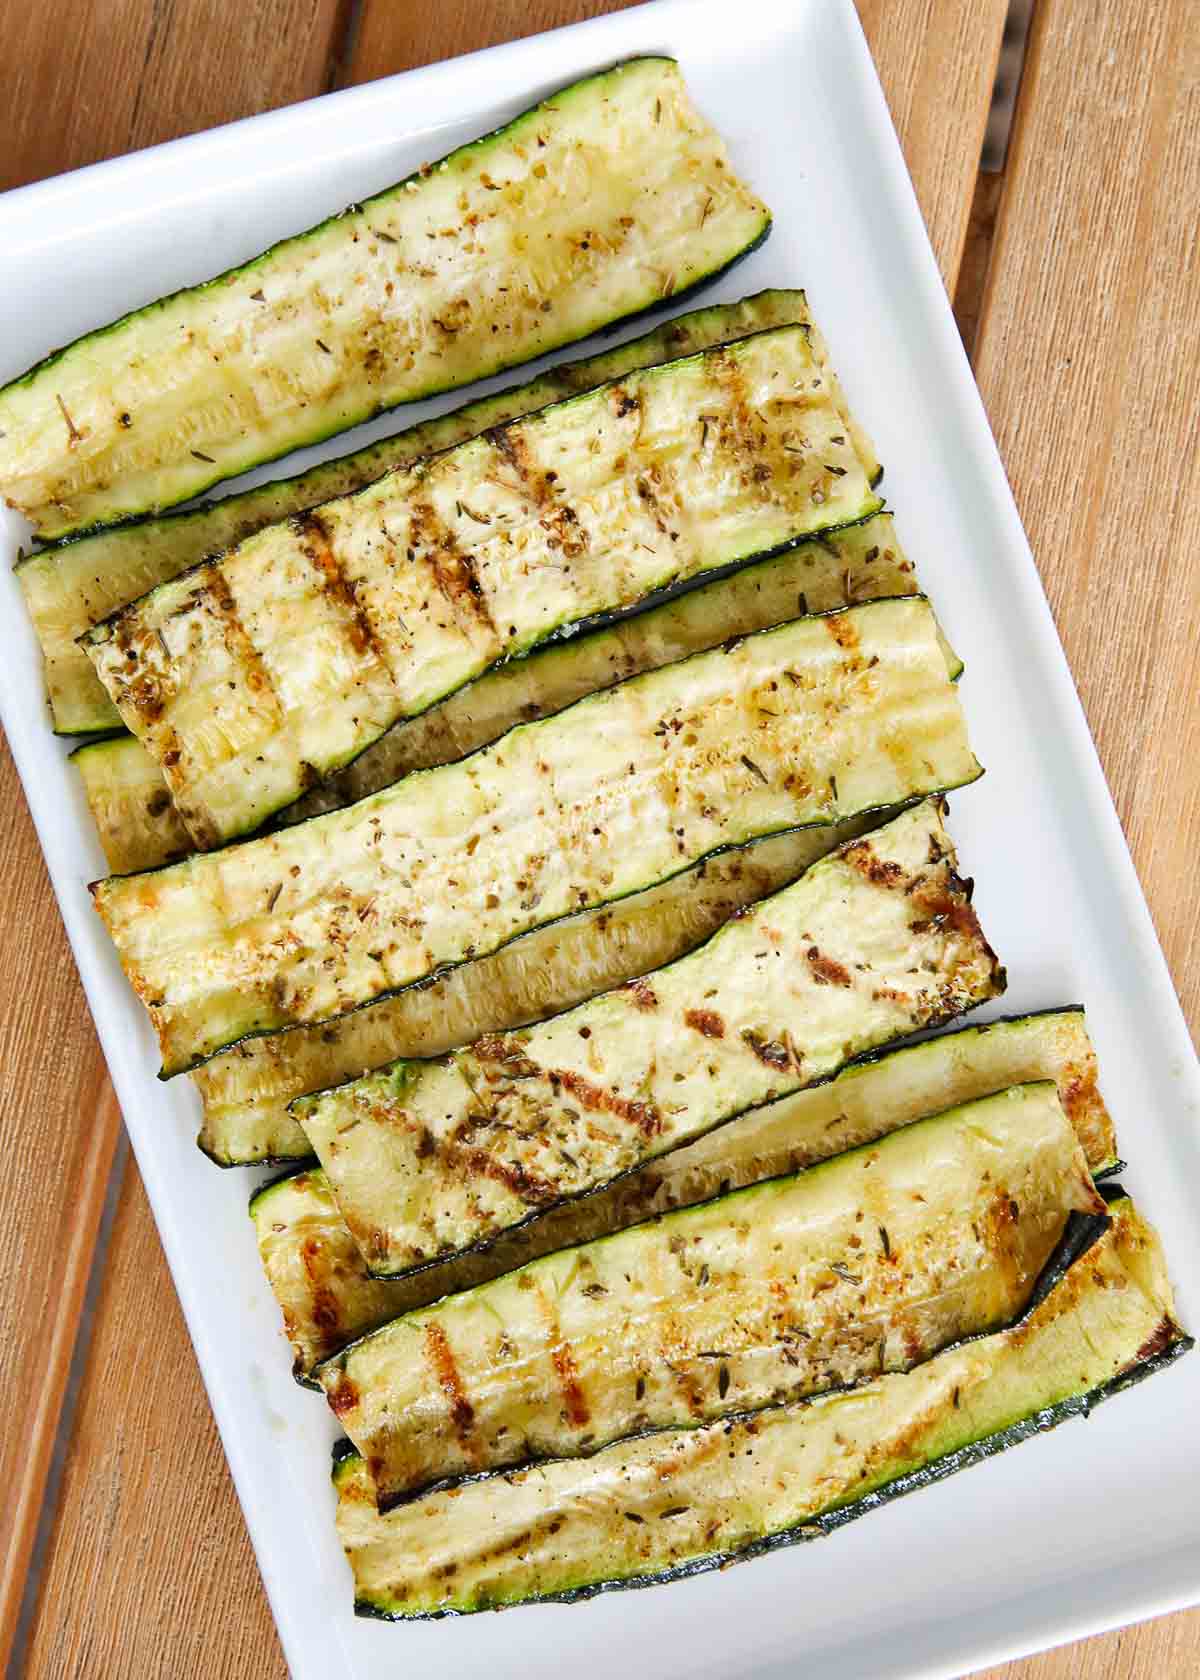 Grilled zucchini on a white plate.